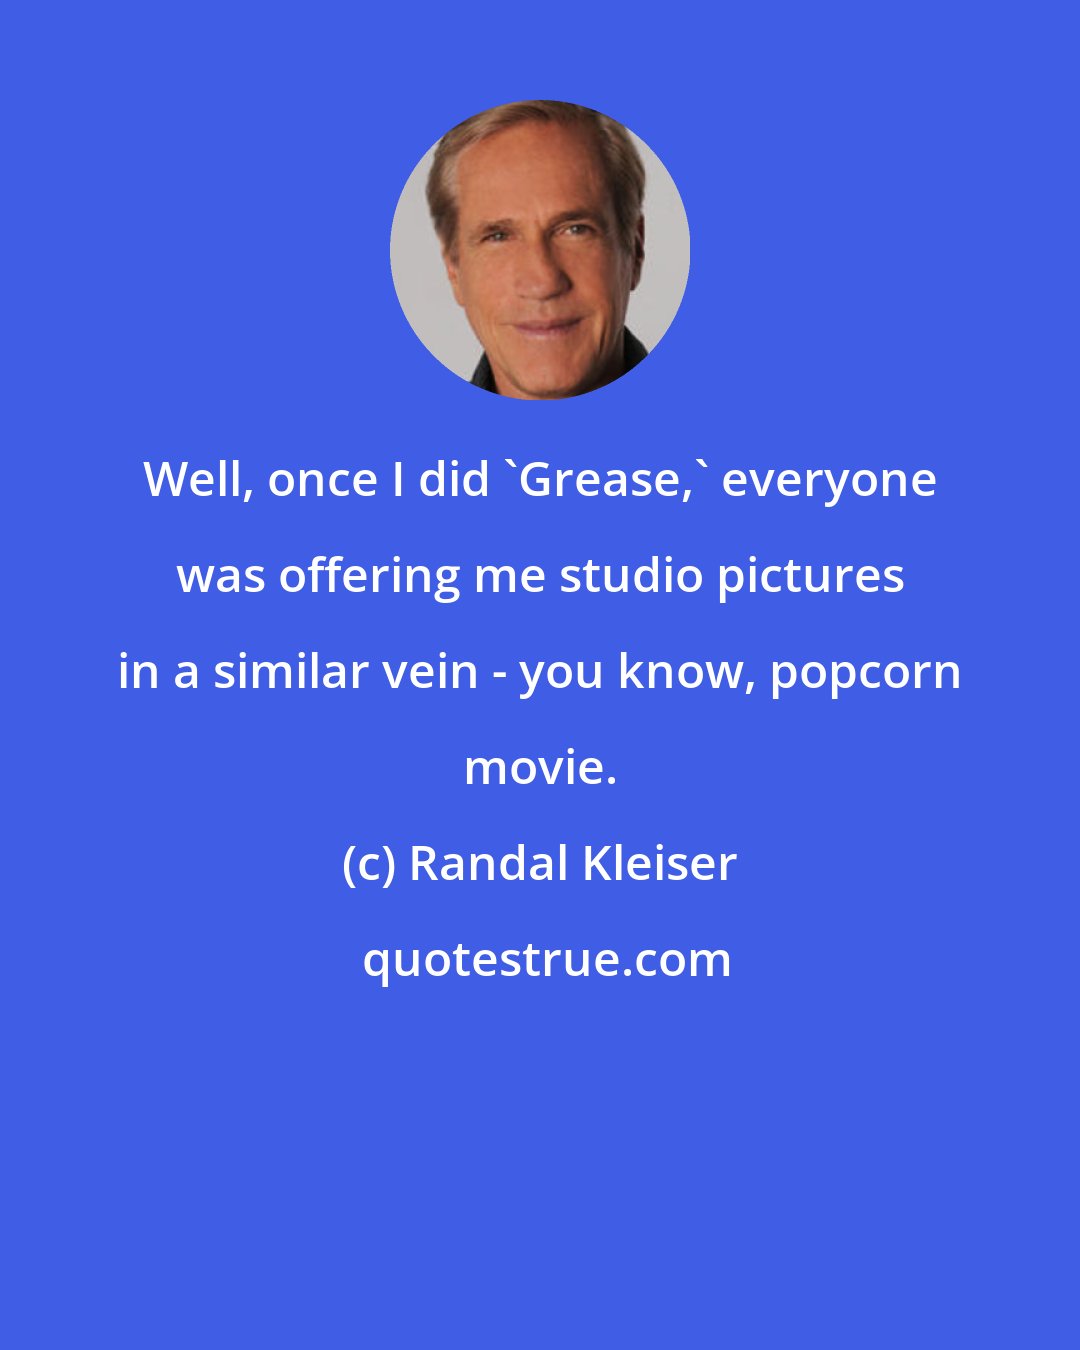 Randal Kleiser: Well, once I did 'Grease,' everyone was offering me studio pictures in a similar vein - you know, popcorn movie.